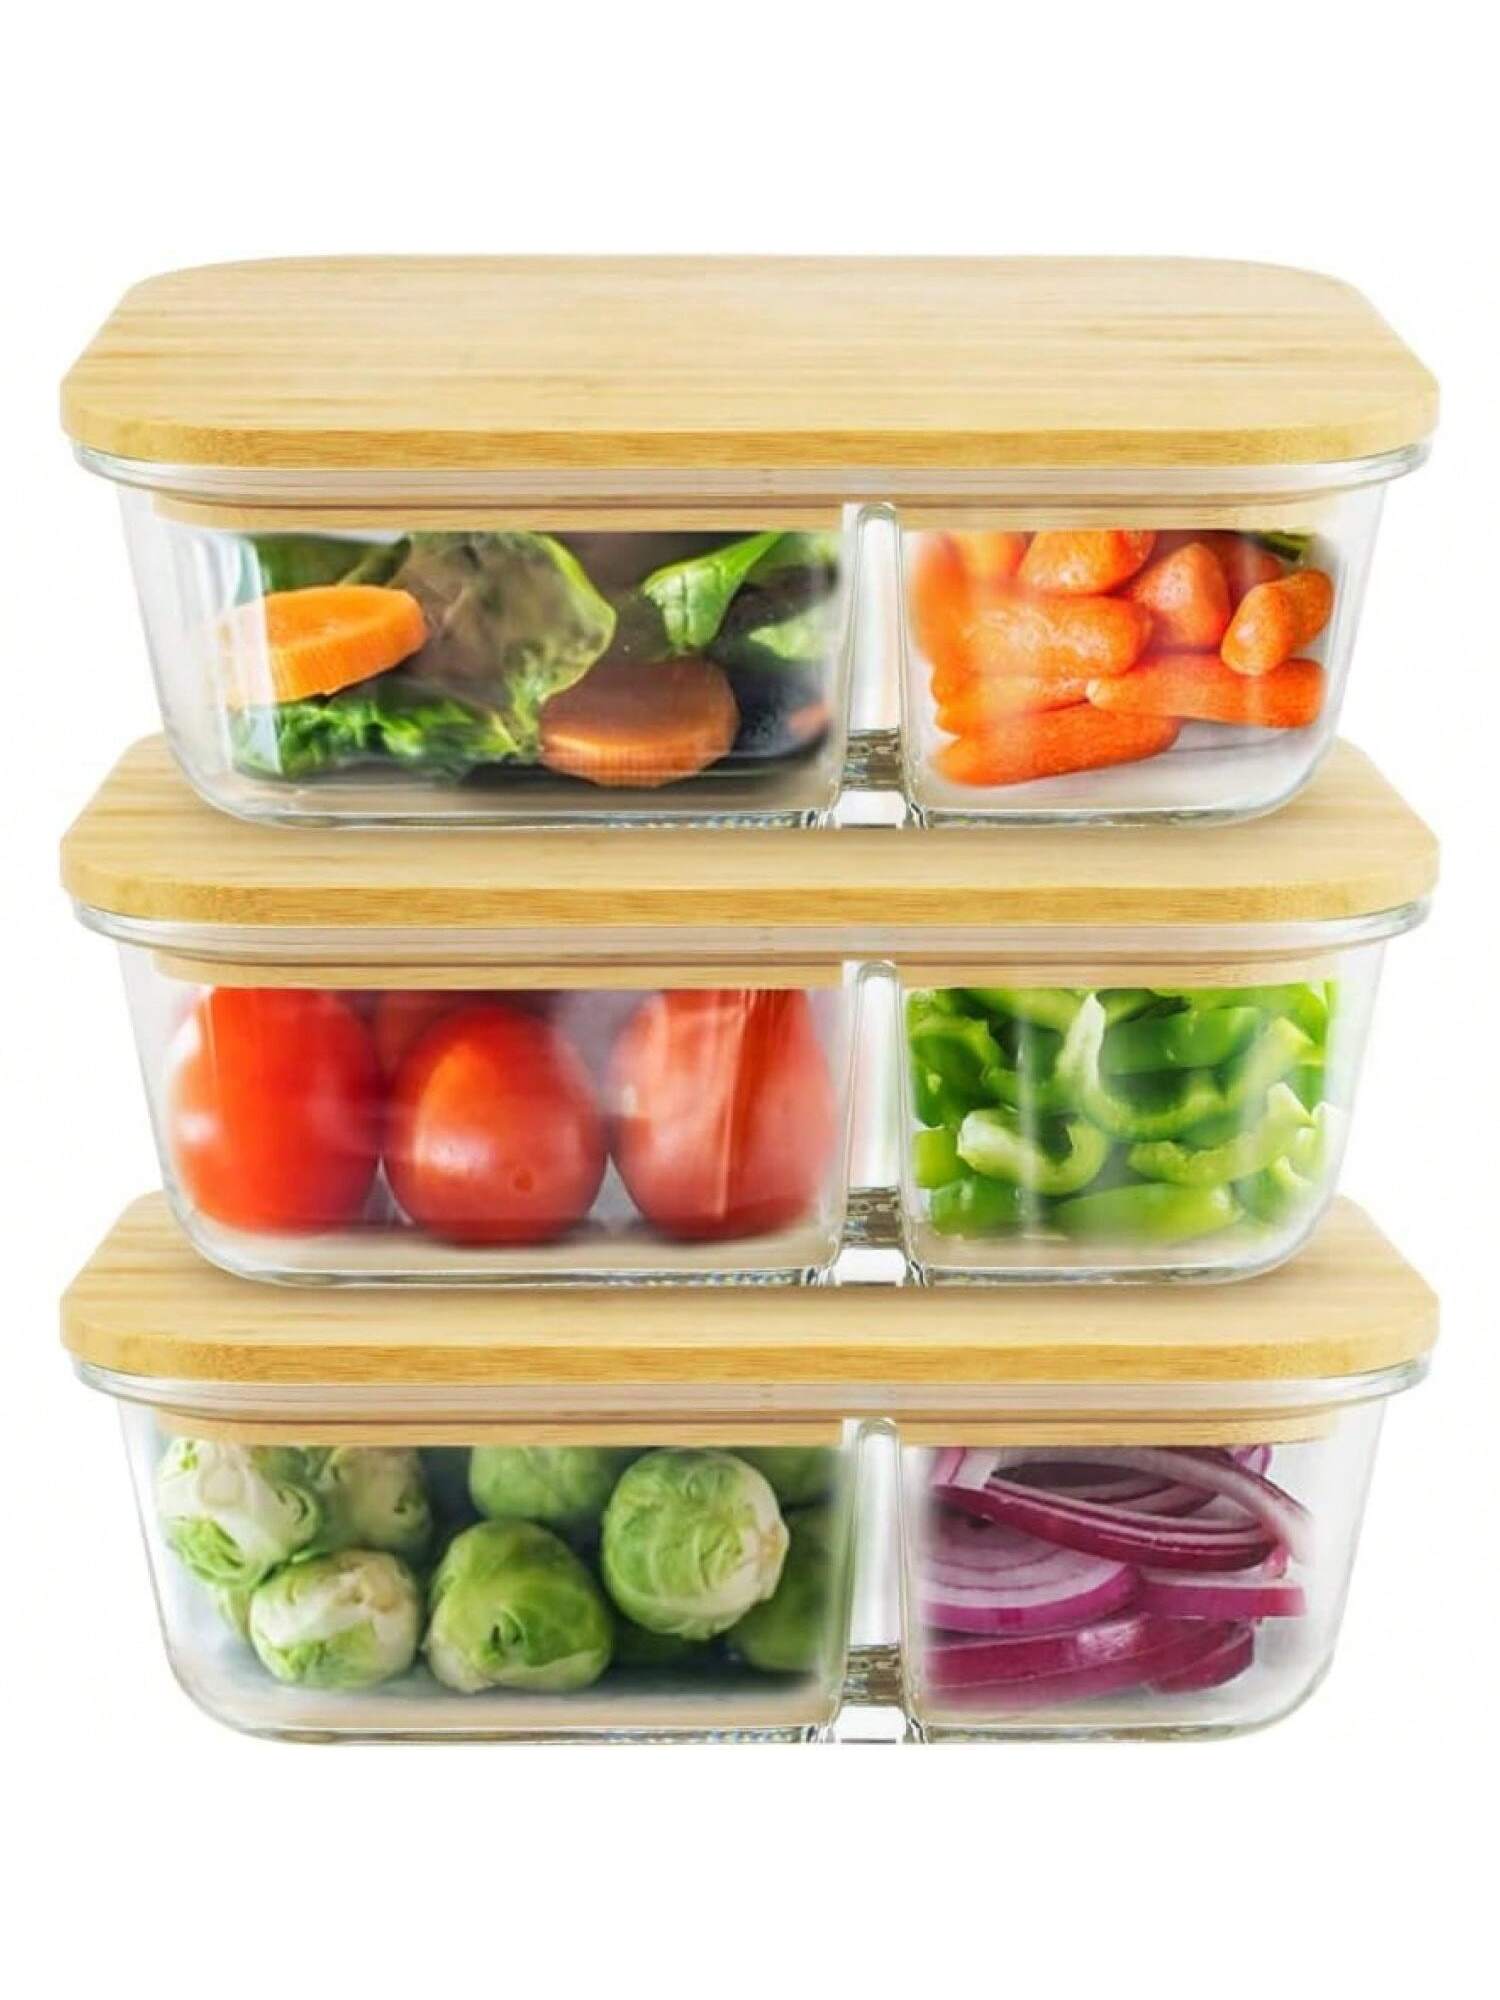 How to use Glass Containers for Freezer Meal Prep